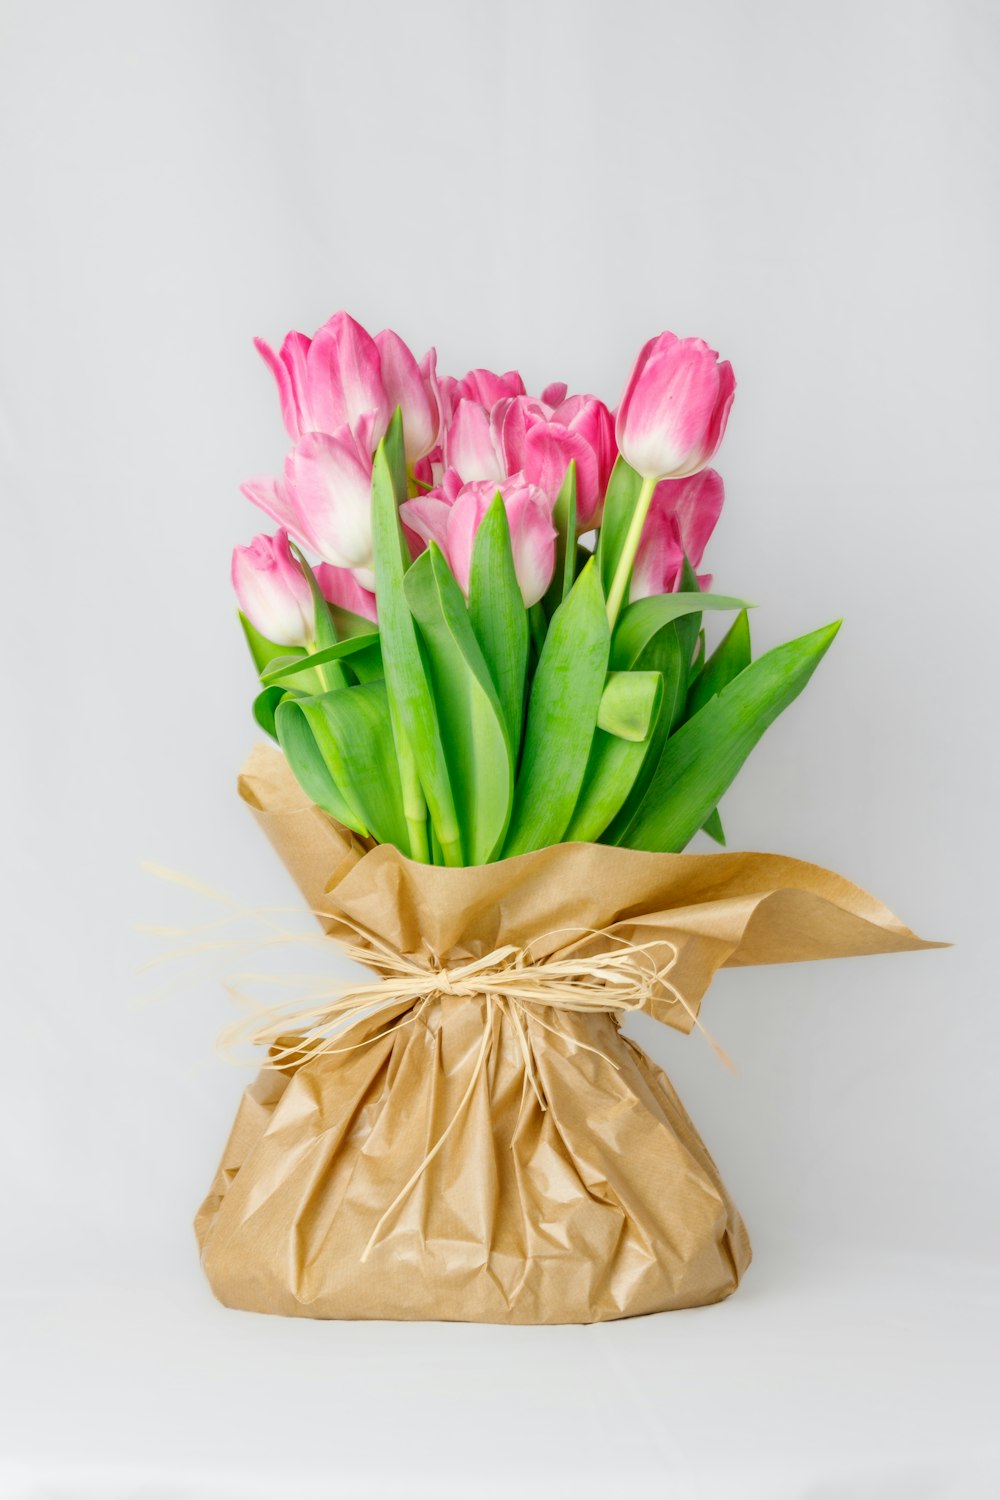 a bouquet of pink and white tulips wrapped in brown paper